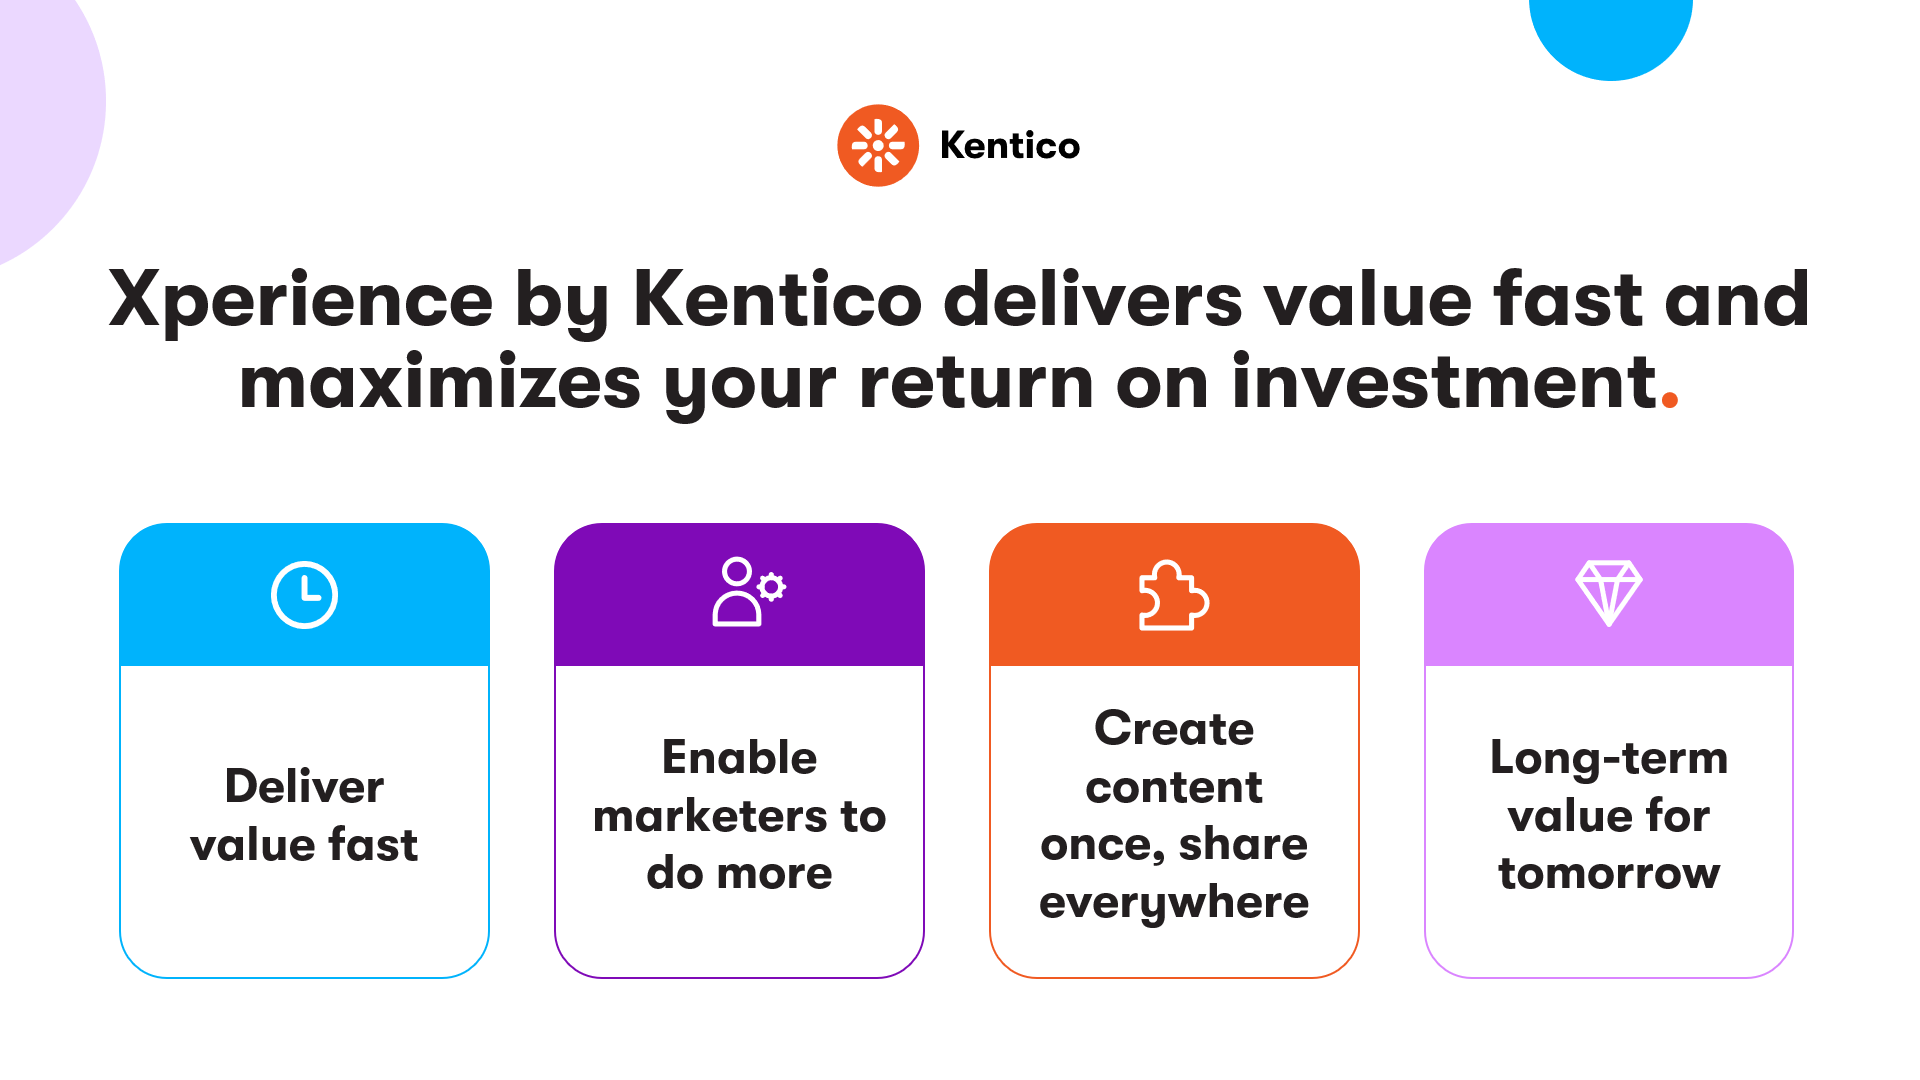 The image is a promotional graphic for "Xperience by Kentico," emphasizing the value and return on investment it offers. There is a headline at the top that reads, "Xperience by Kentico delivers value fast and maximizes your return on investment." Below the headline, there are four colorful icons with text, arrayed in a grid. 1. A blue icon with a clock symbol, labeled "Deliver value fast." 2. A purple icon with a figure and gear symbol, labeled "Enable marketers to do more." 3. An orange icon with a puzzle piece symbol, labeled "Create content once, share everywhere." 4. A violet icon with a diamond symbol, labeled "Long-term value for tomorrow." The Kentico logo is displayed in the top right corner. The design uses a simple and clean layout with flat icons and a limited color palette of blue, purple, orange, and violet, with each icon having a corresponding color.